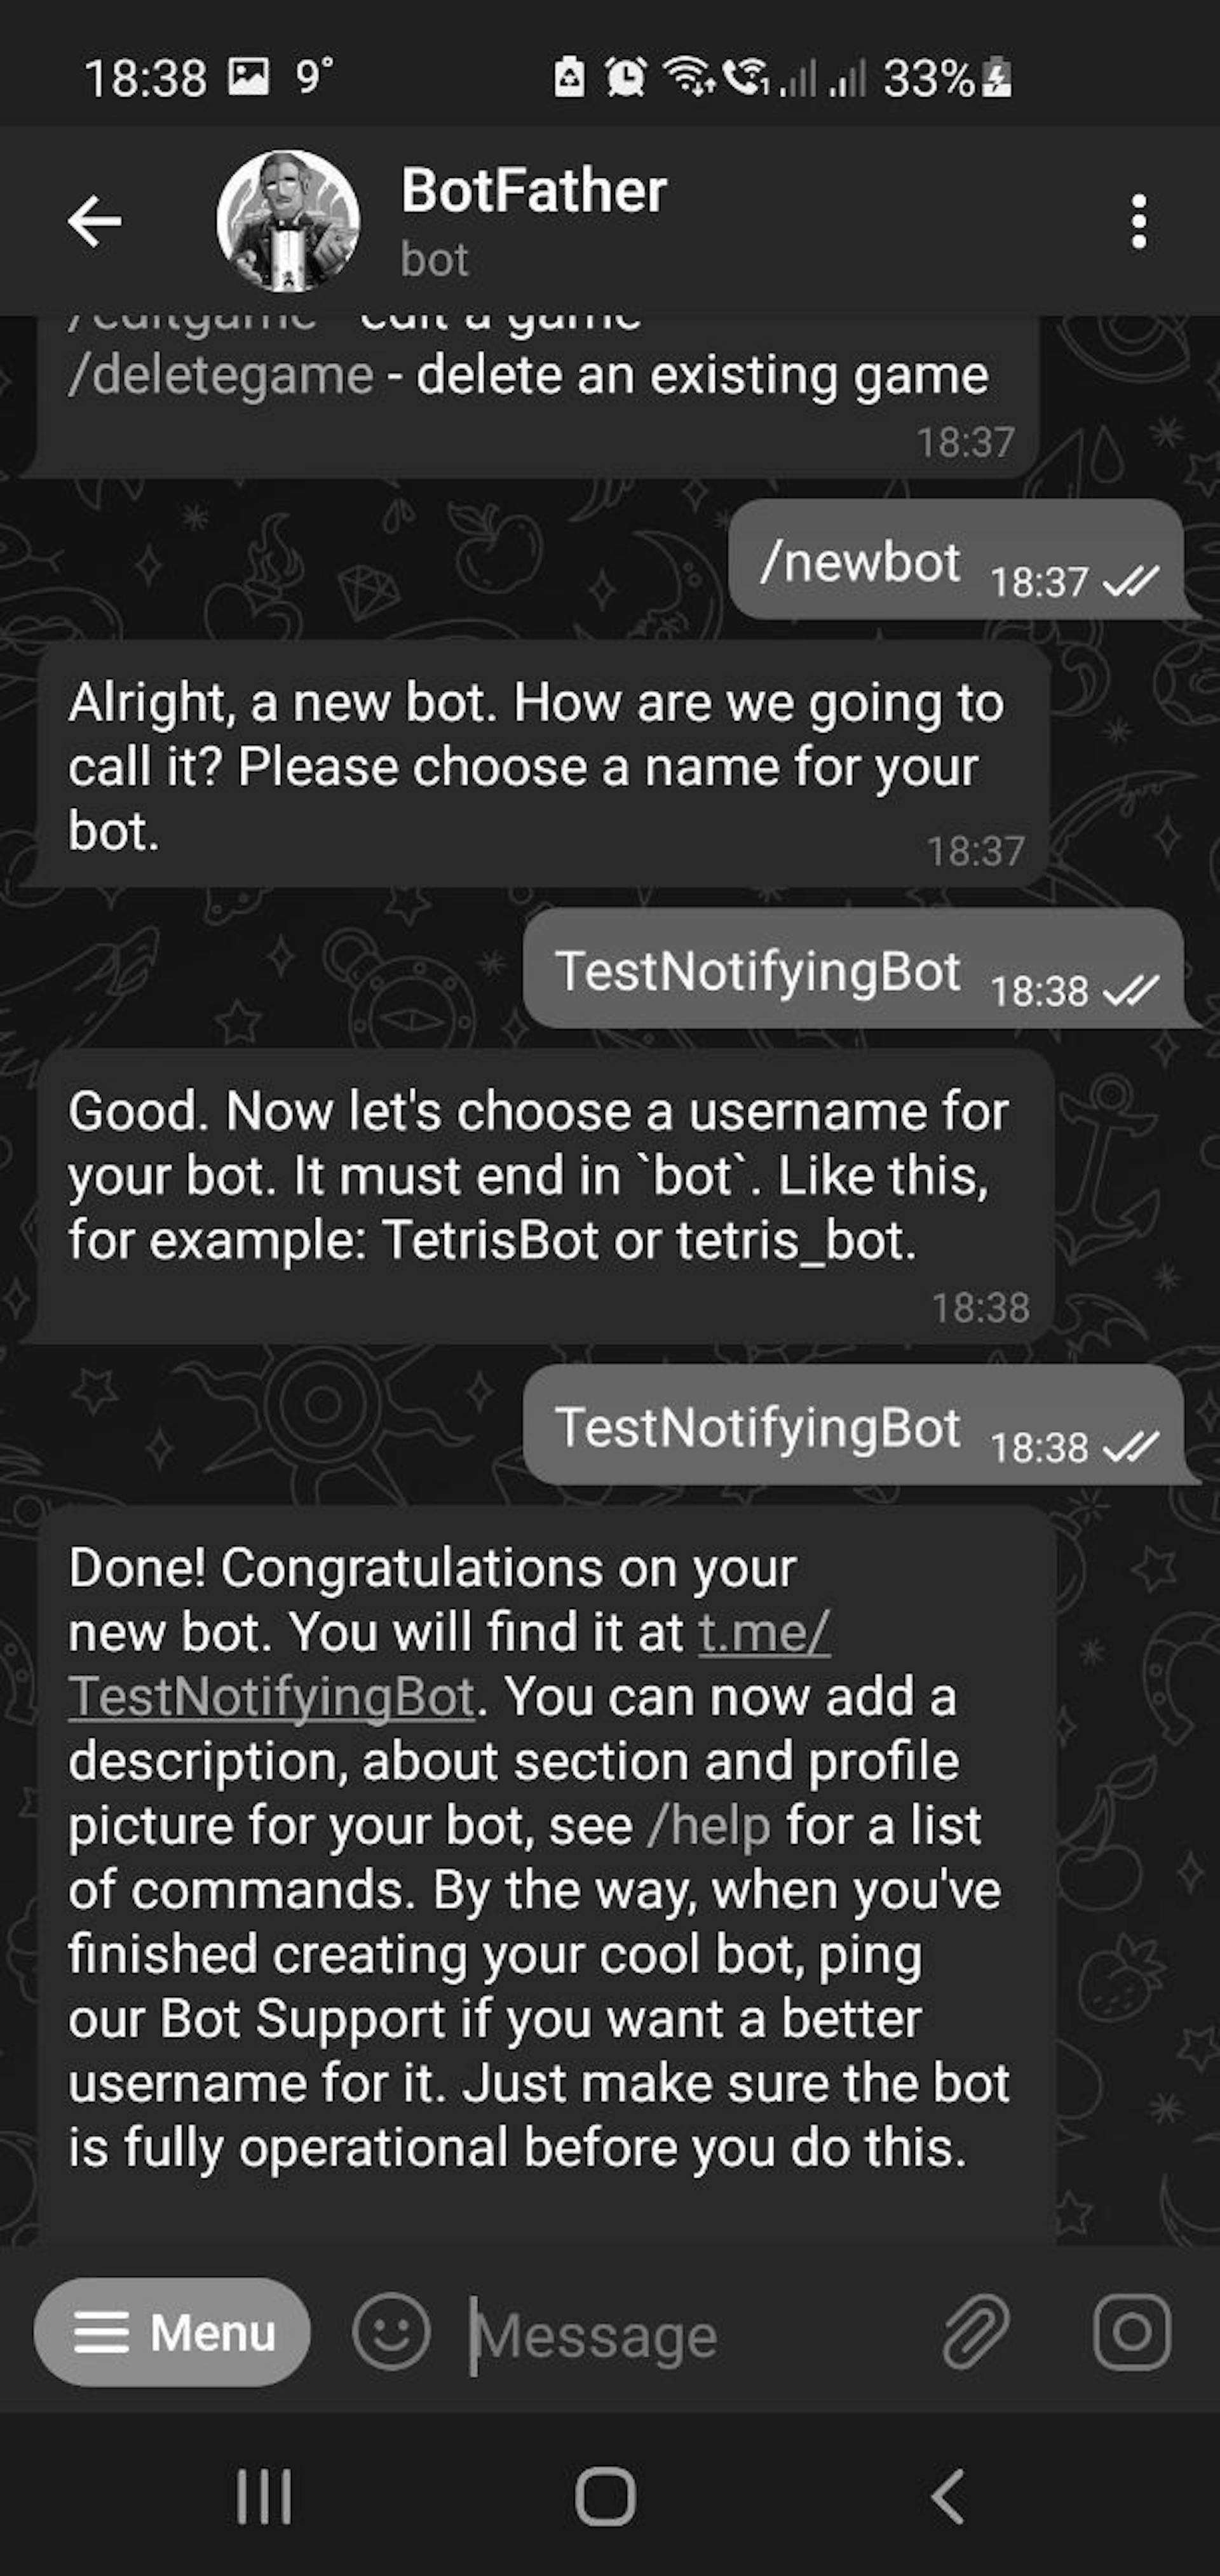 Interacting with BotFather